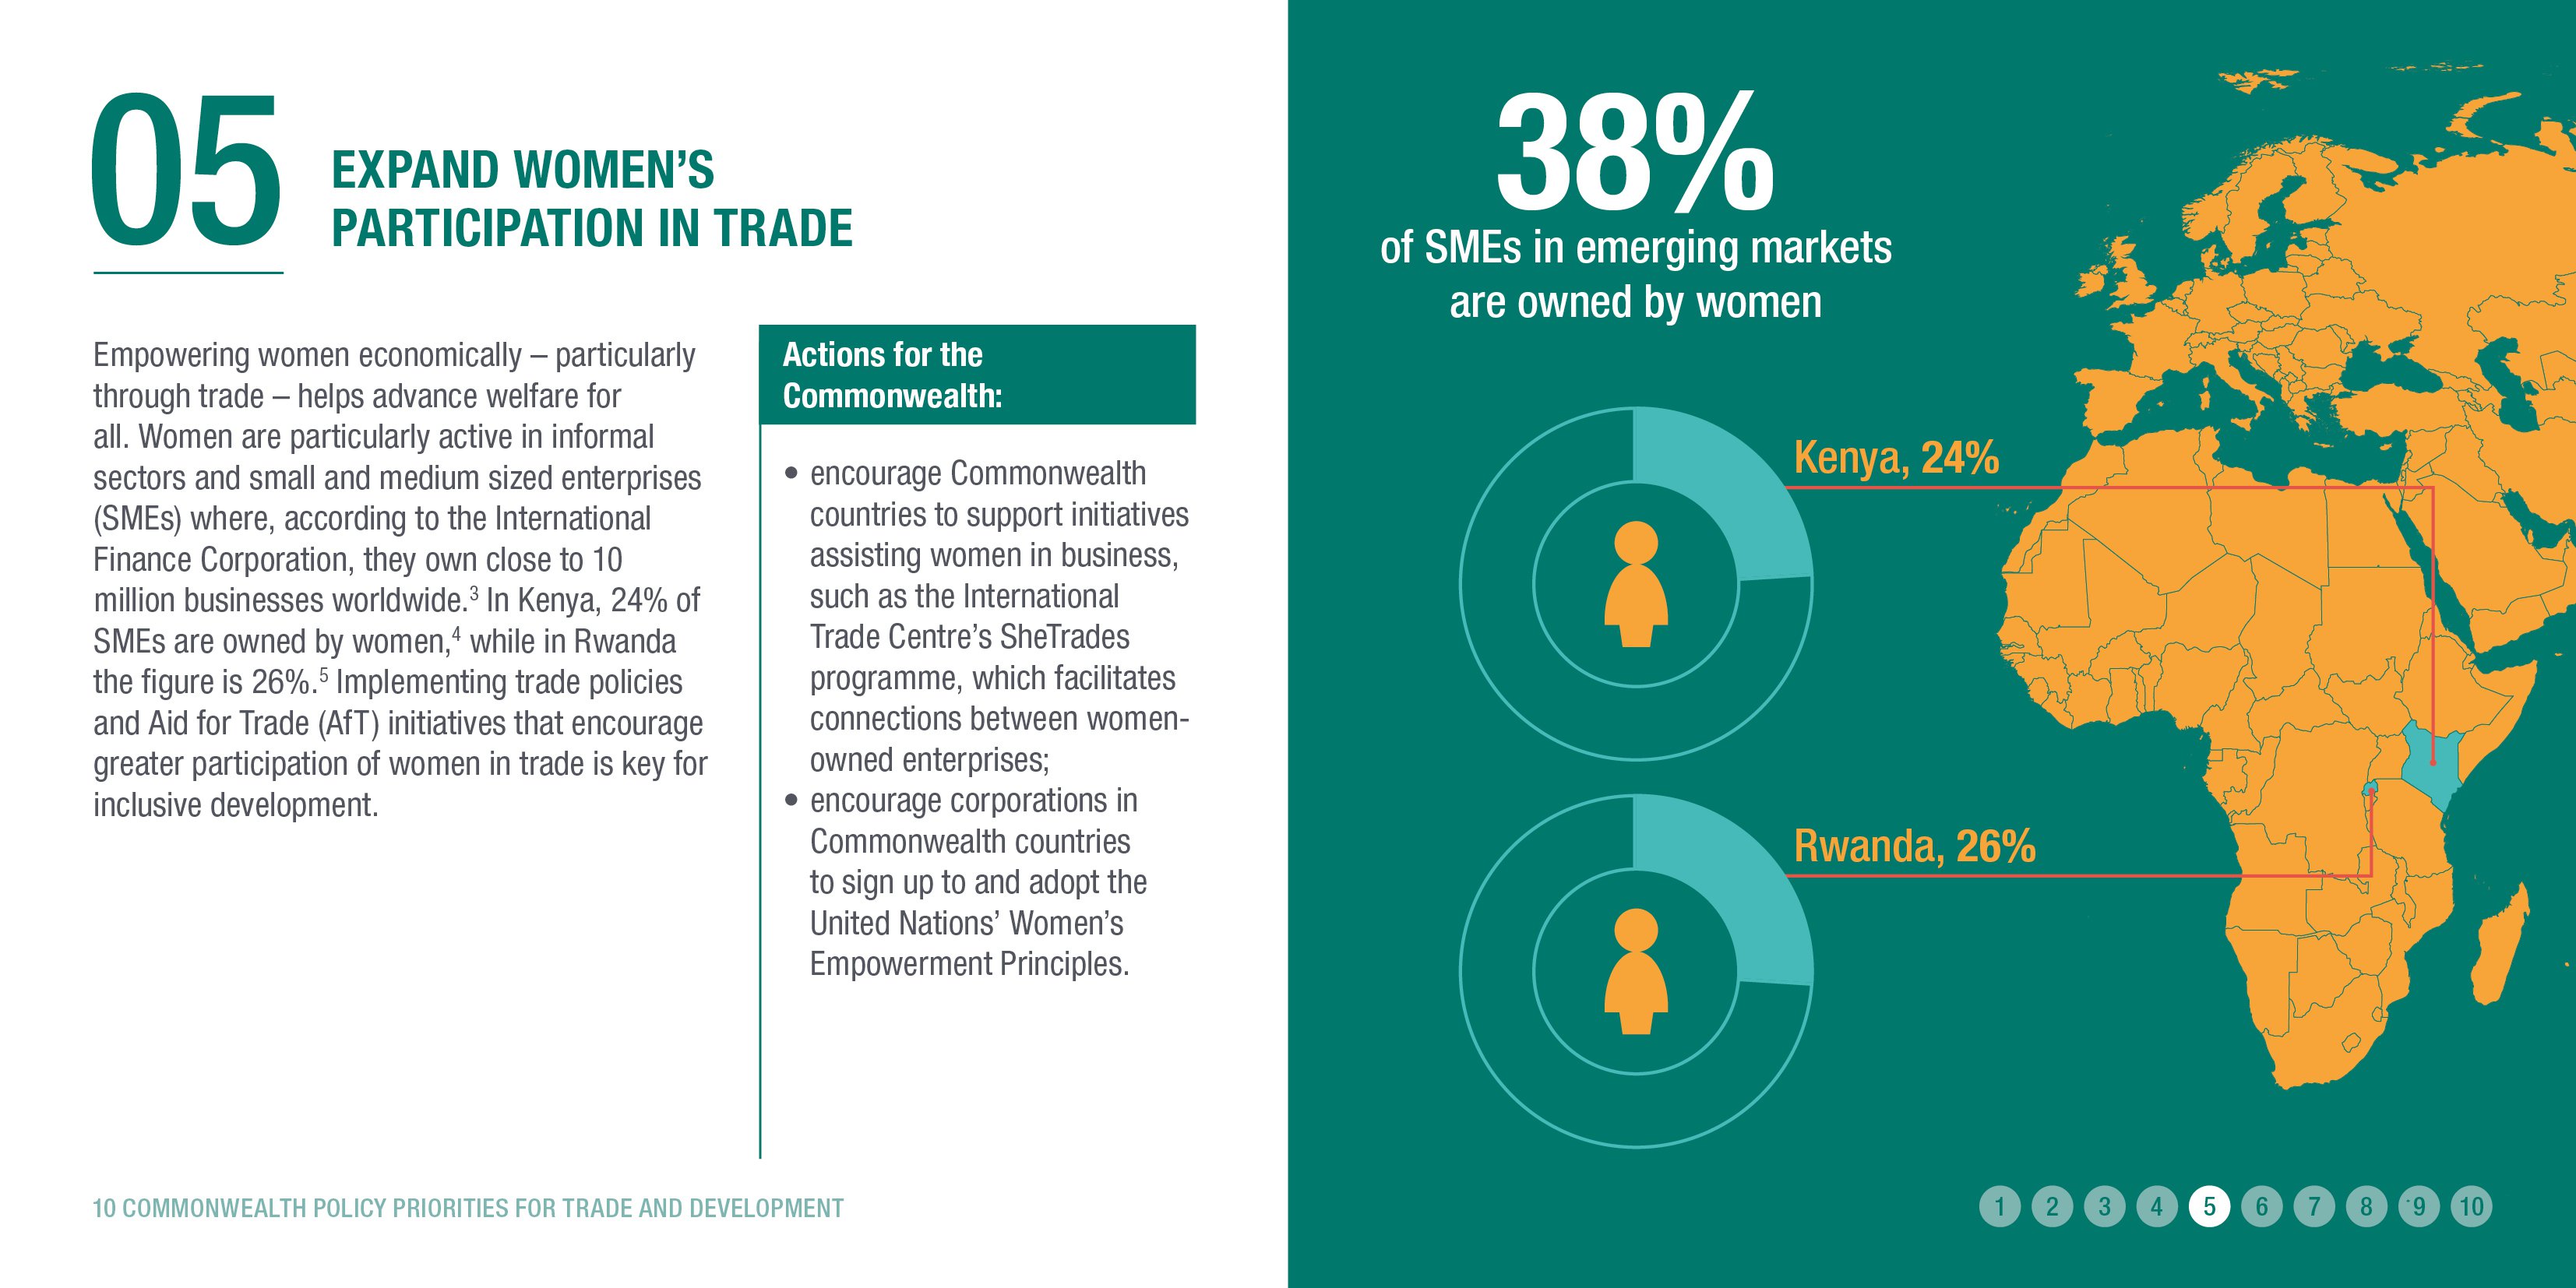 Expand women's participation in trade